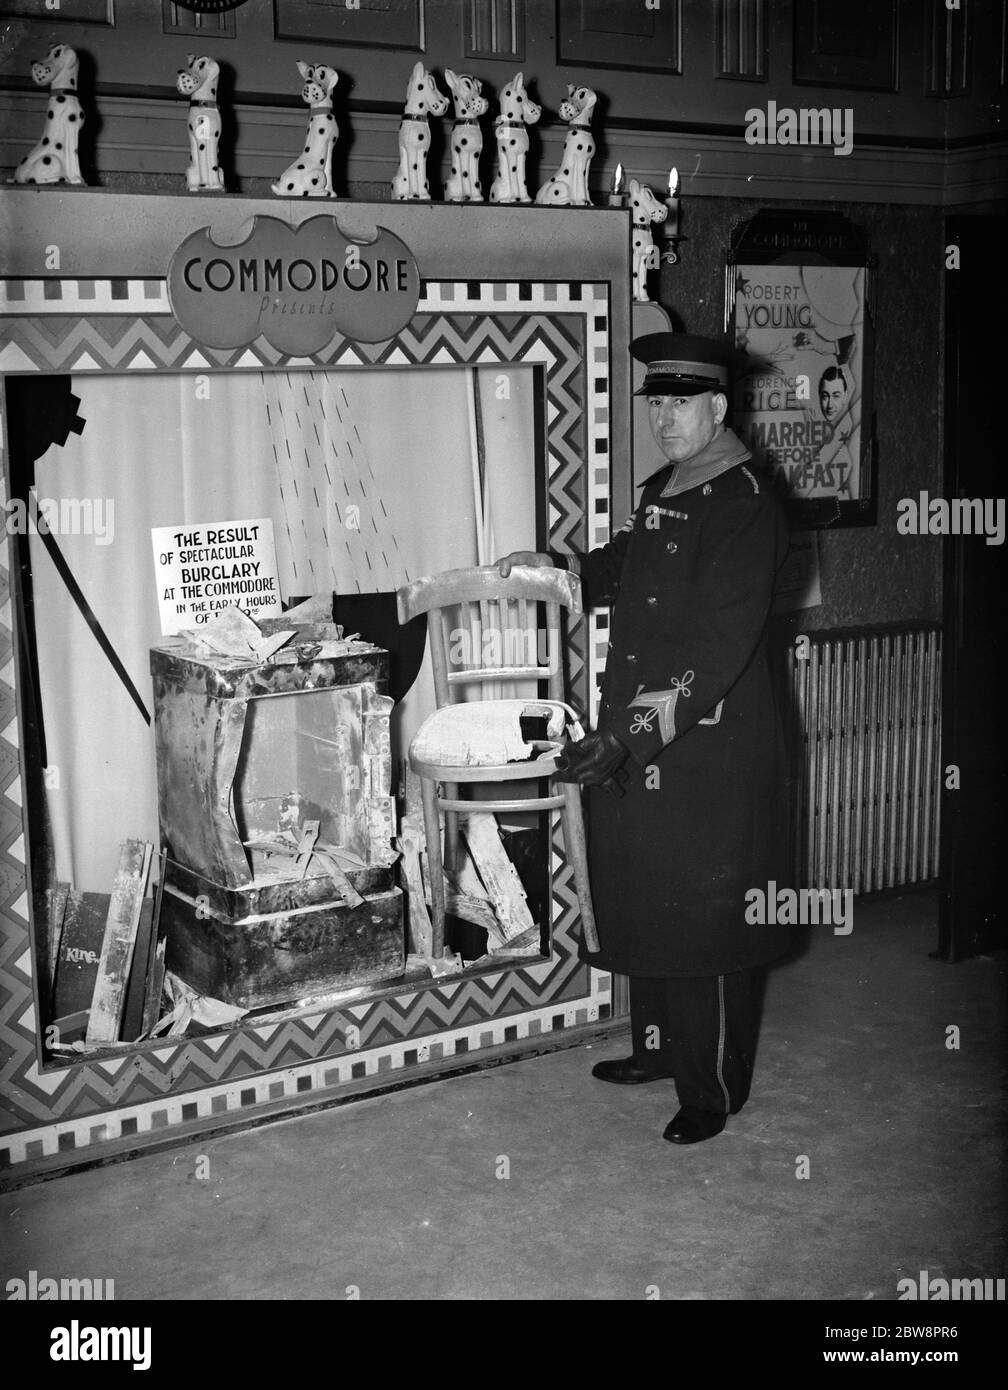 The cinema usher at the Commodore Theatre , Orpington standing by a display of the damaged cinema safe which was blown - up during a burglary . 1937 Stock Photo